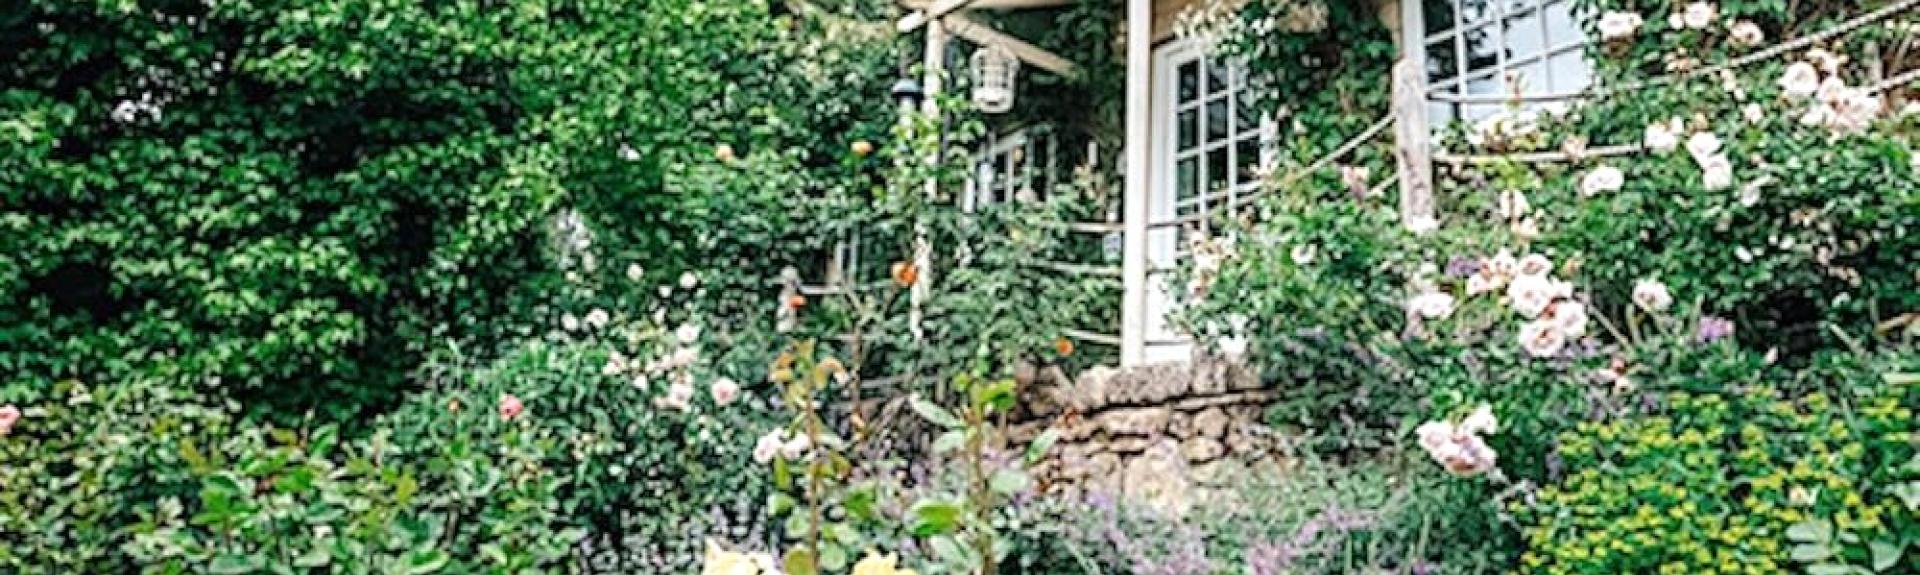 A cottage window and French doors are semi-hidden by a flowering mass of climbing roses.